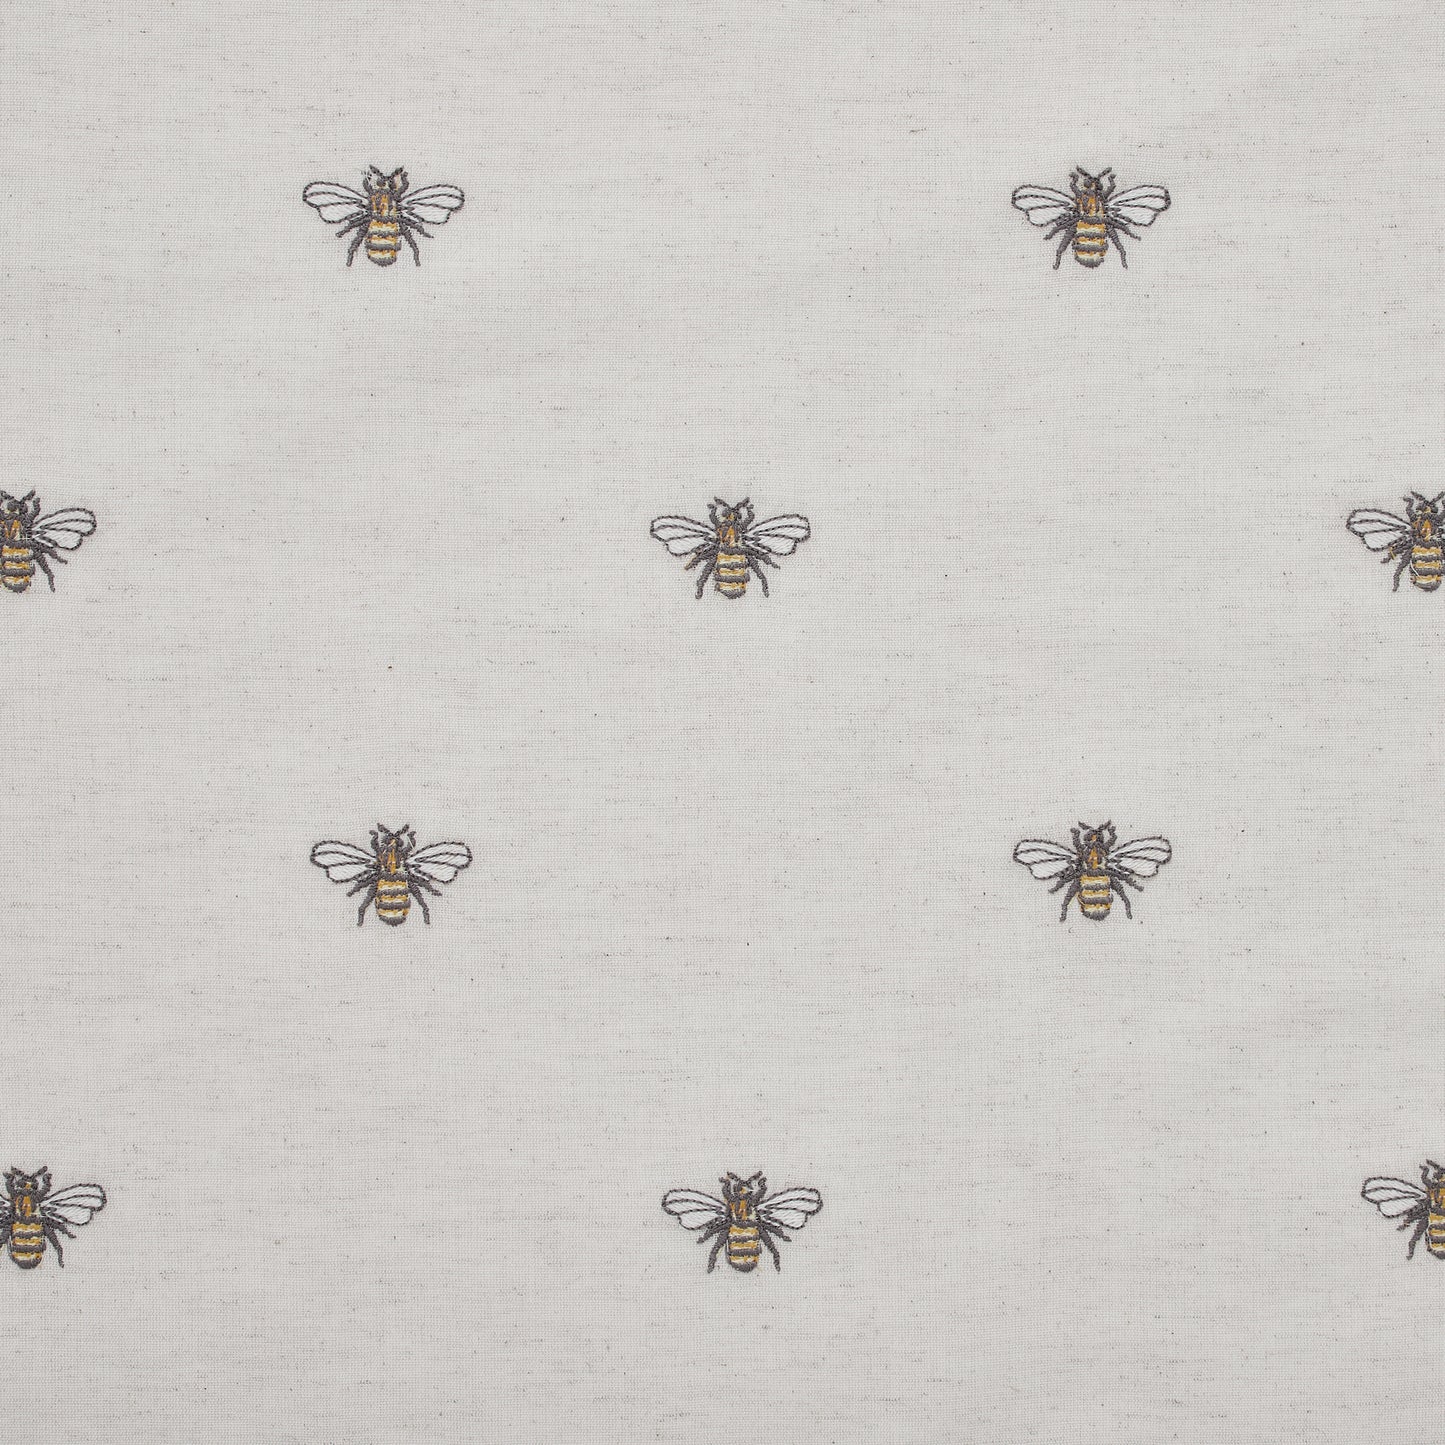 81264-Embroidered-Bee-Valance-16x60-image-6